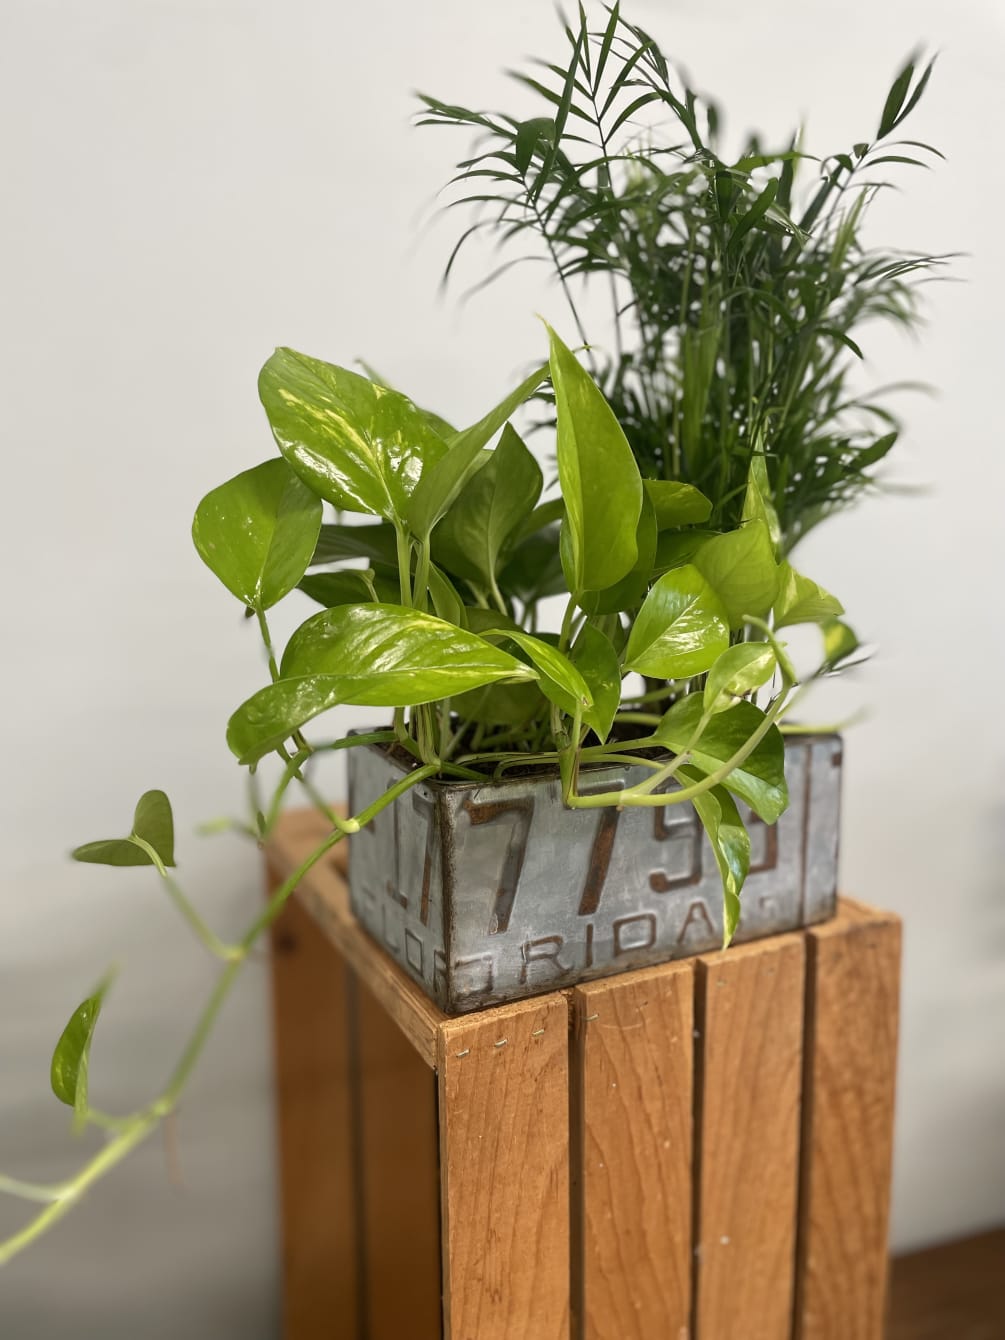 2 small green plants come planted in a cute vintage-style license plate